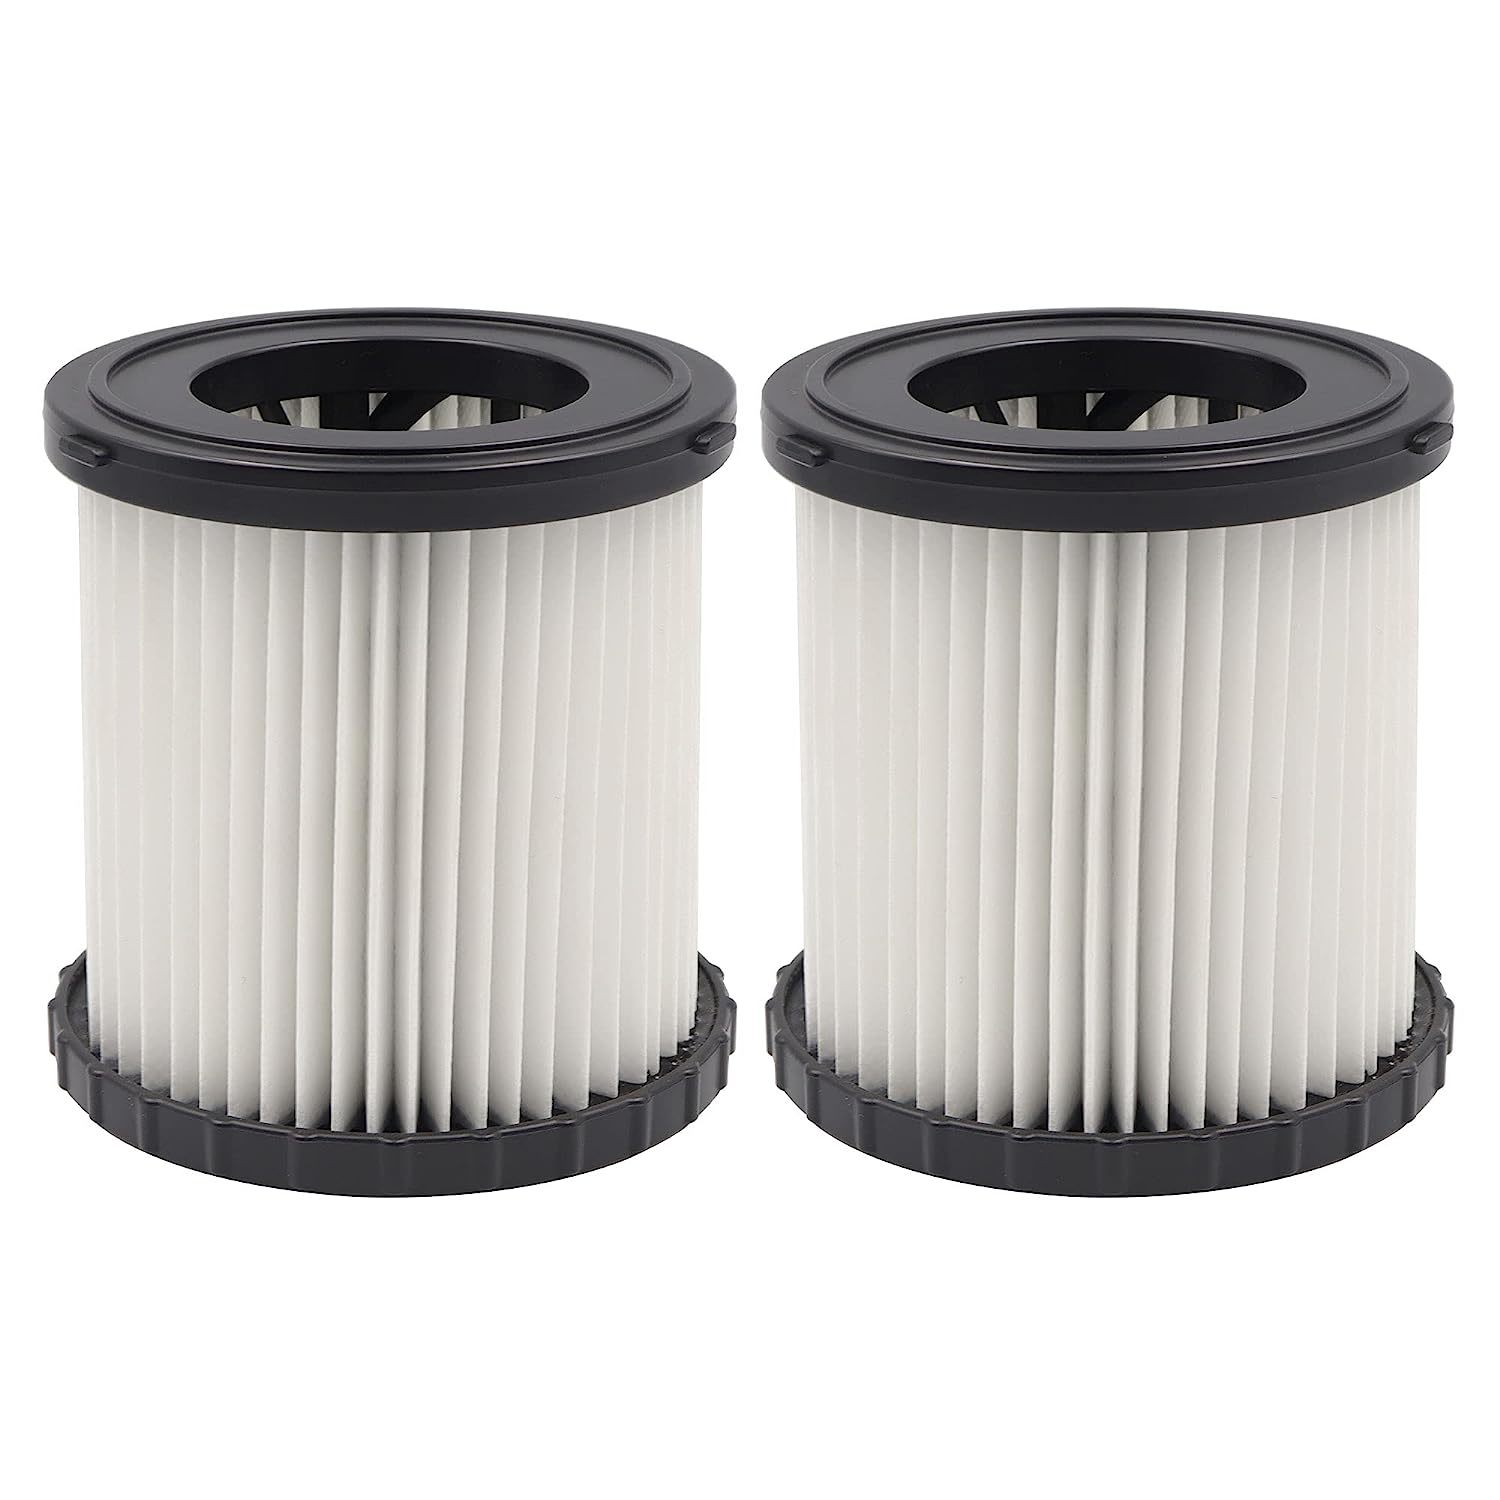 Primary image for 2 Packs Of Dcv5801H Wet/Dry Vacuum Hepa Replacement Filter, Suitable For Dewalt 